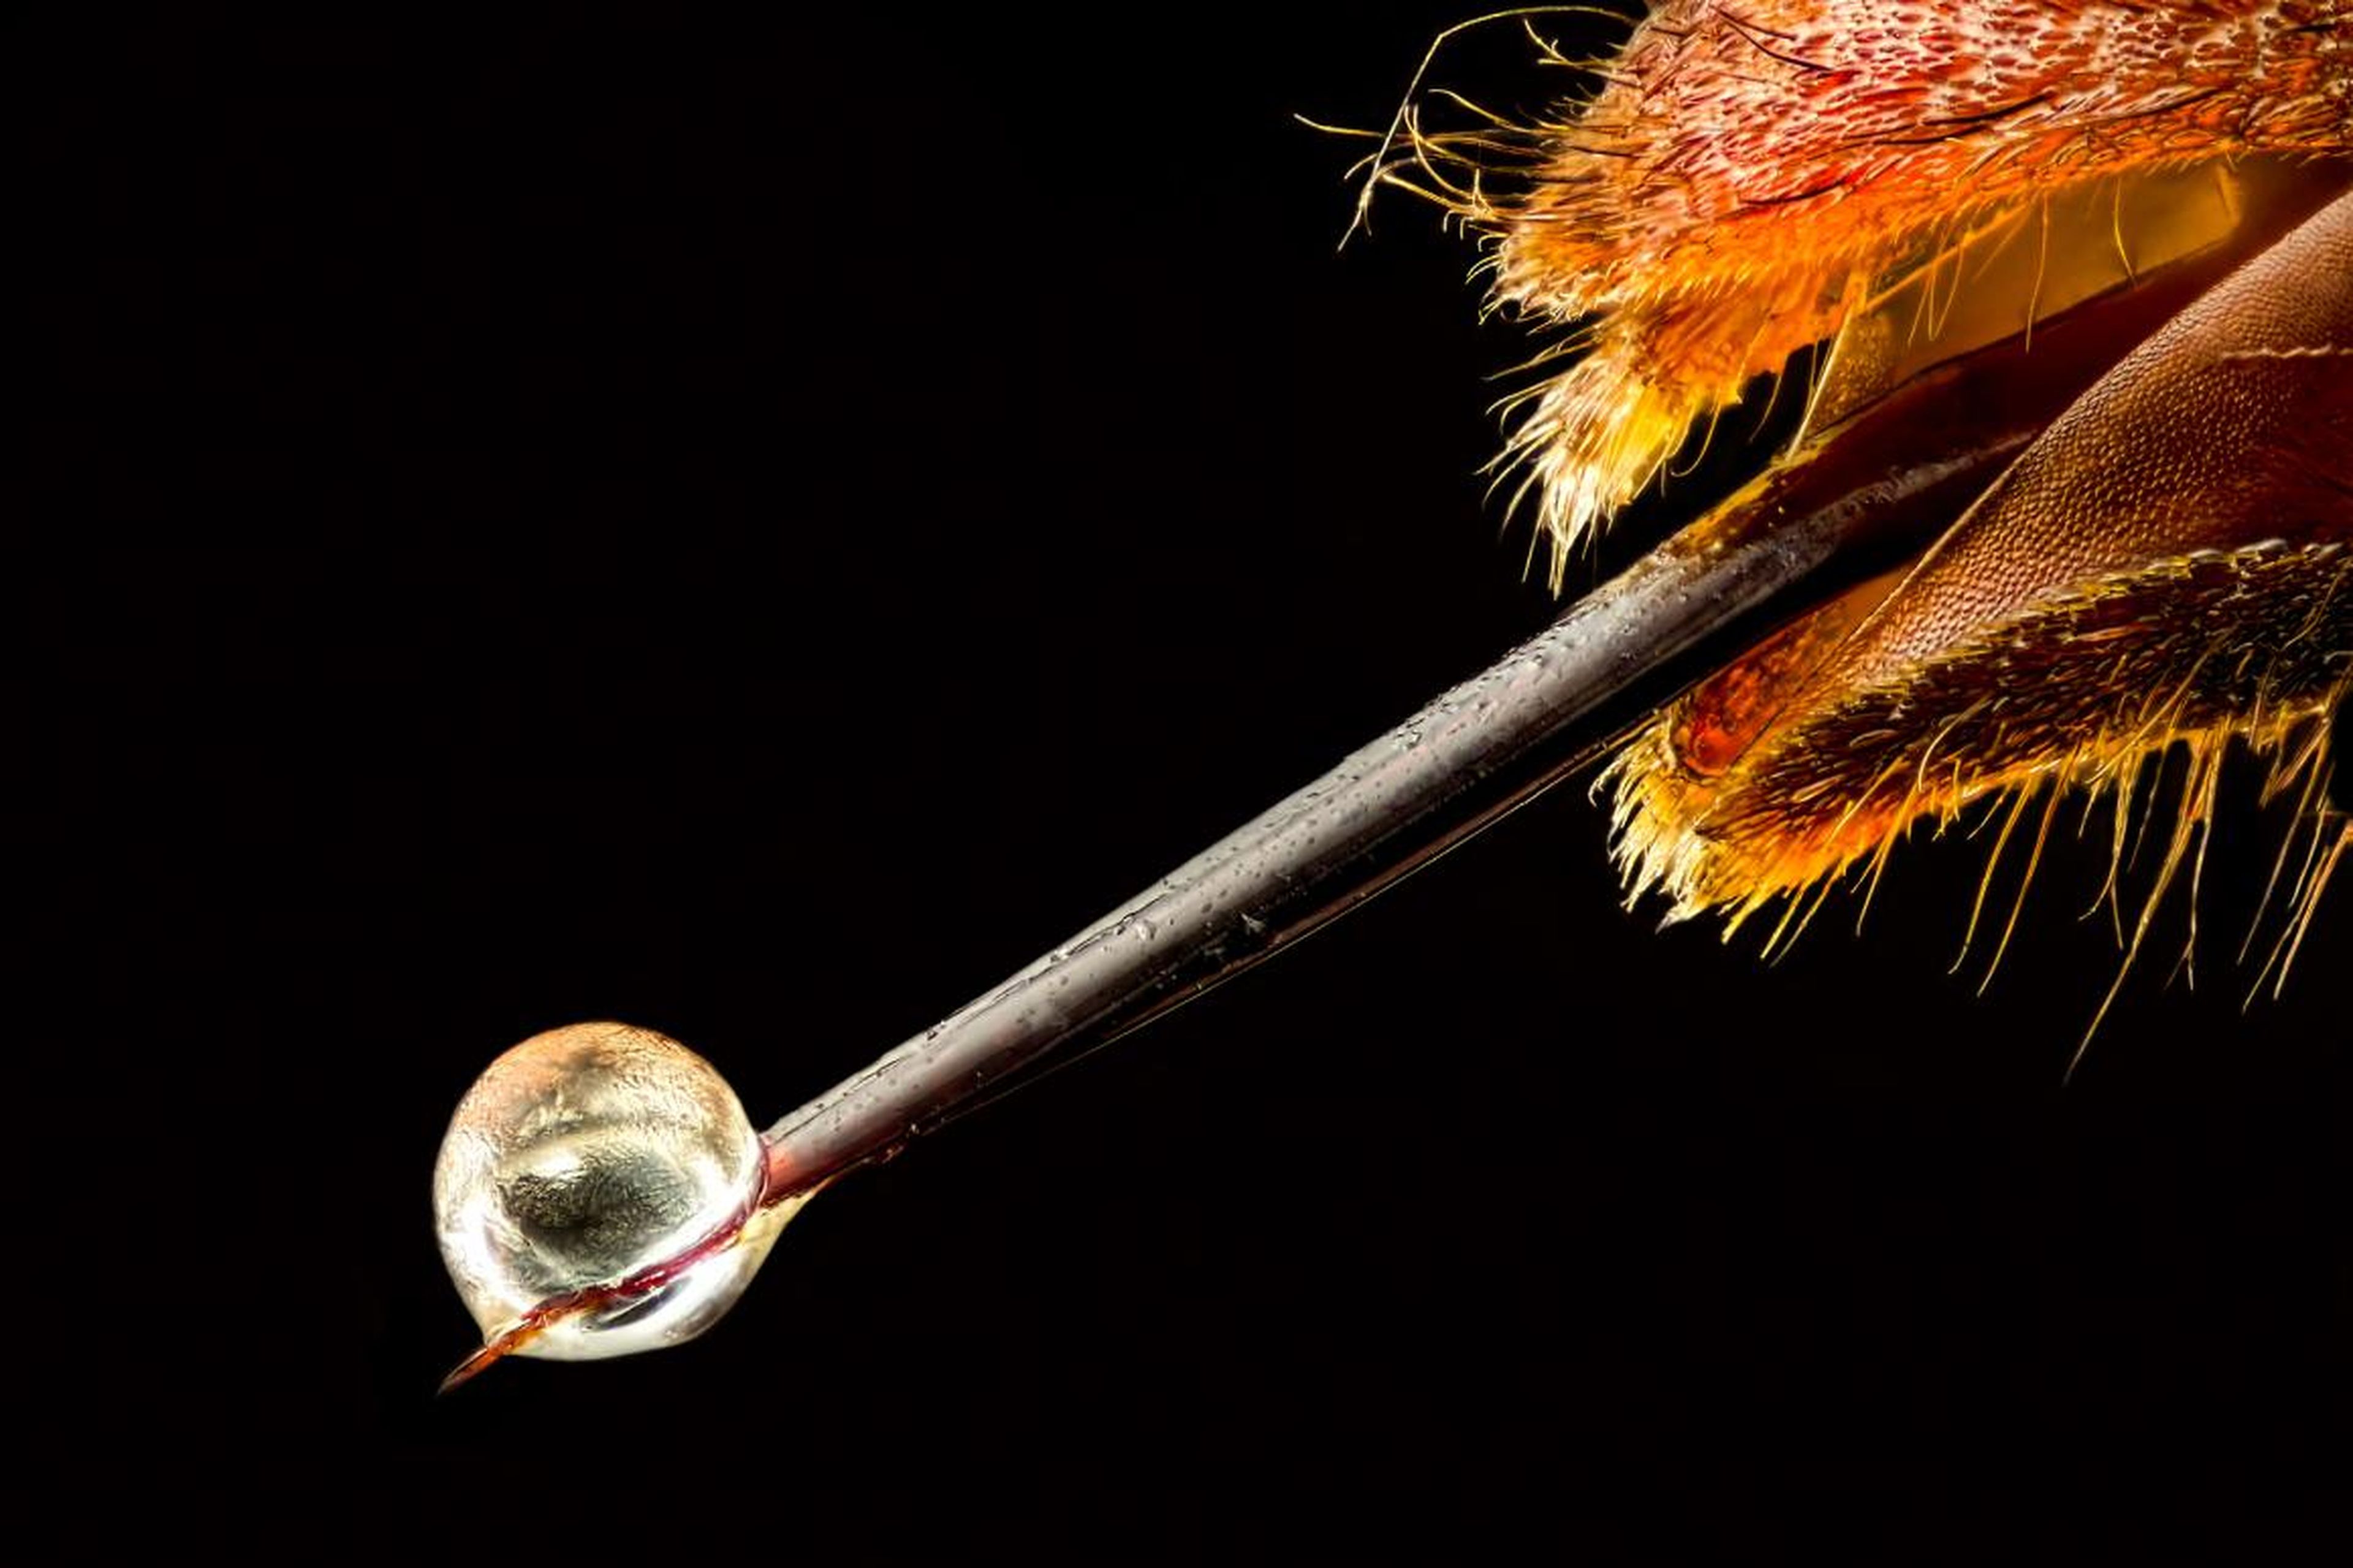 No. 19: Ouch — an Asian hornet with venom on its stinger.